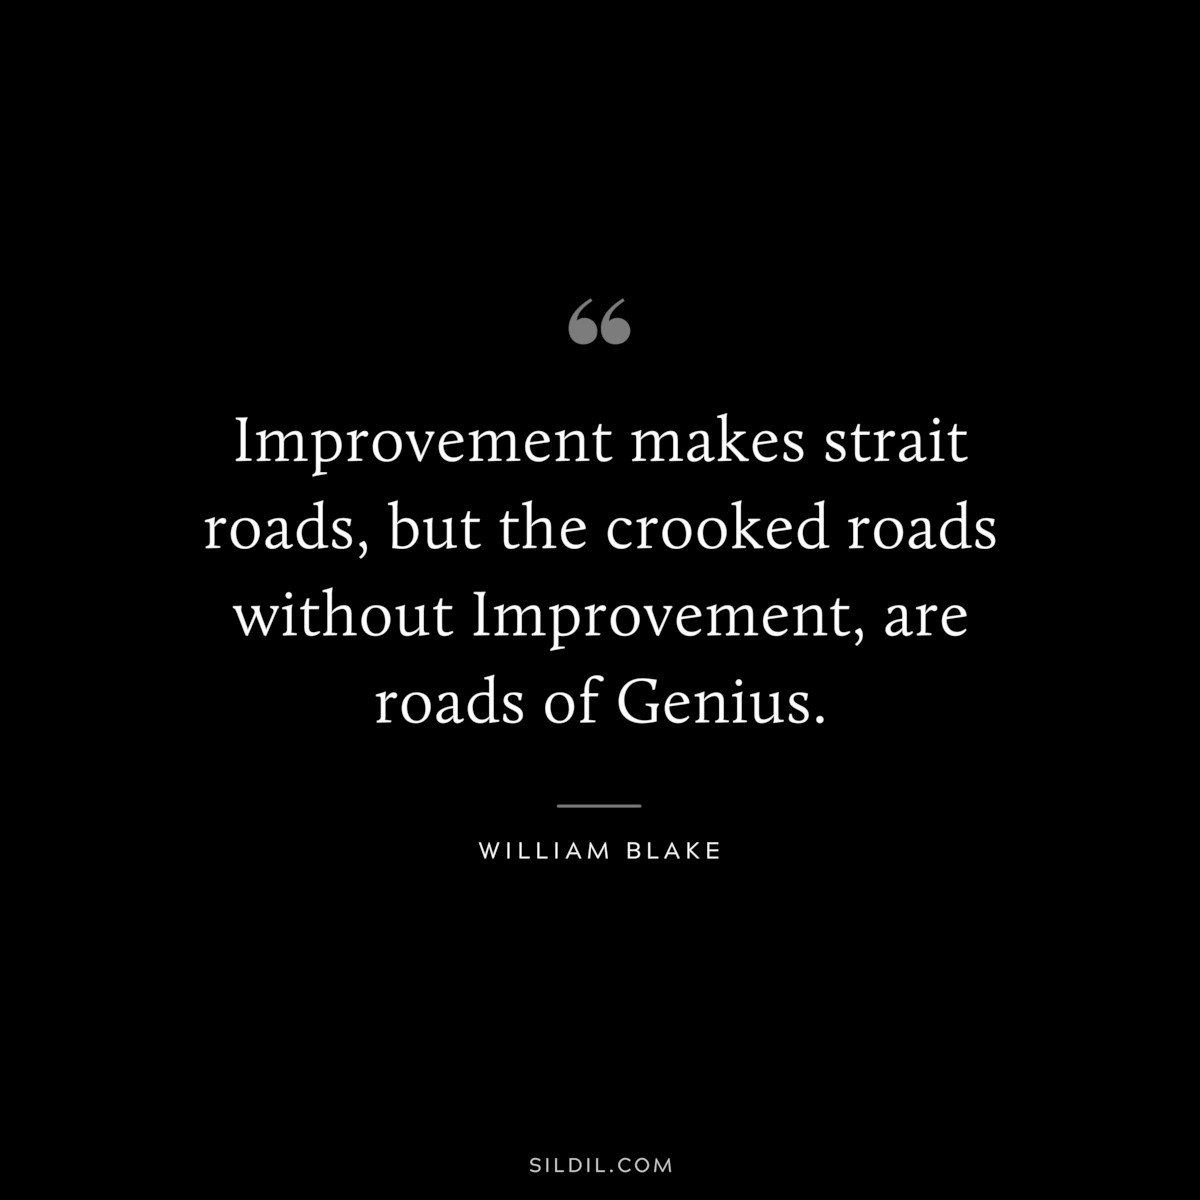 Improvement makes strait roads, but the crooked roads without Improvement, are roads of Genius. ― William Blake